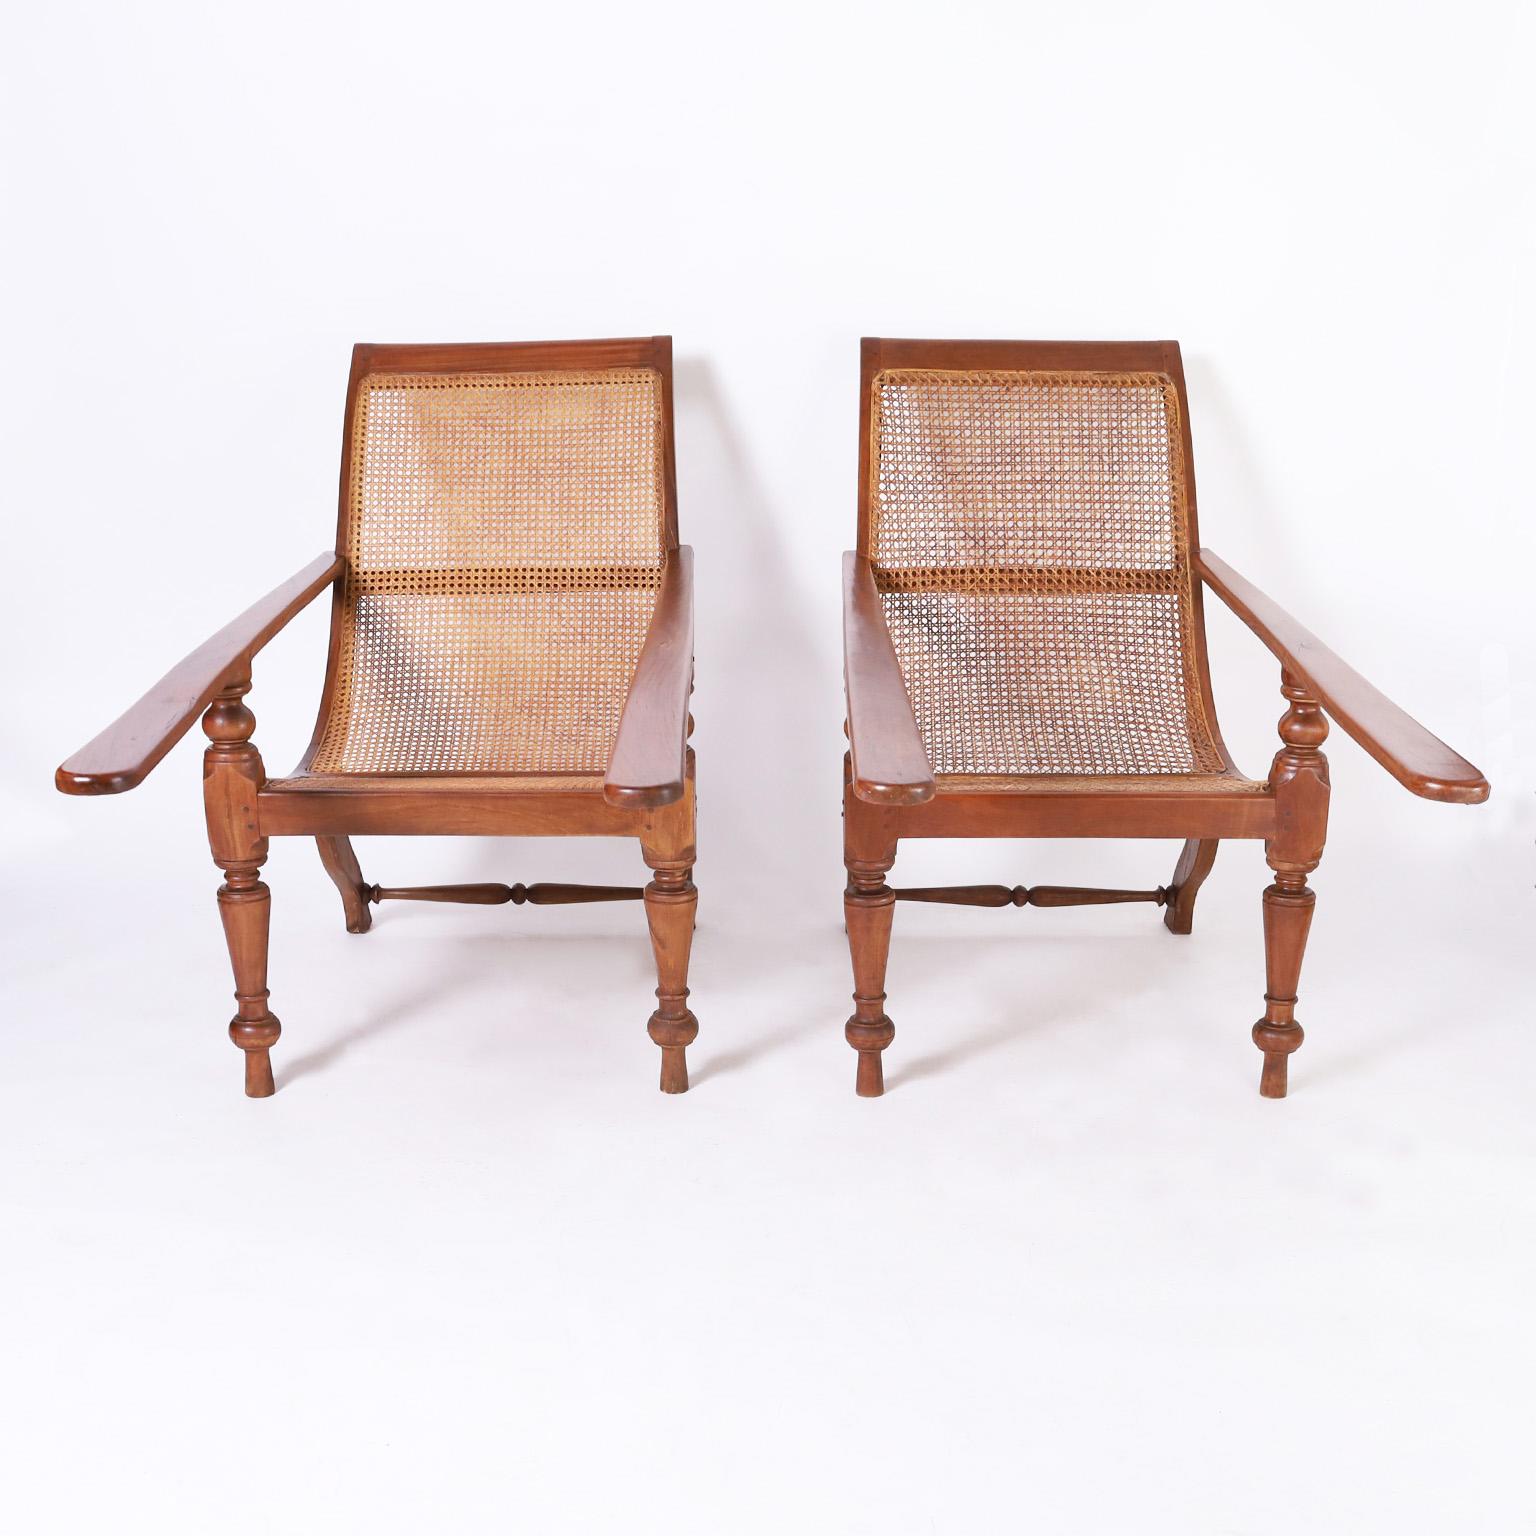 Intriguing pair of early 20th century British Colonial plantation chairs handcrafted in indigenous mahogany with elegant form featuring caned backs and seats, pegged construction, boot planks and Classic turned front legs. 

.